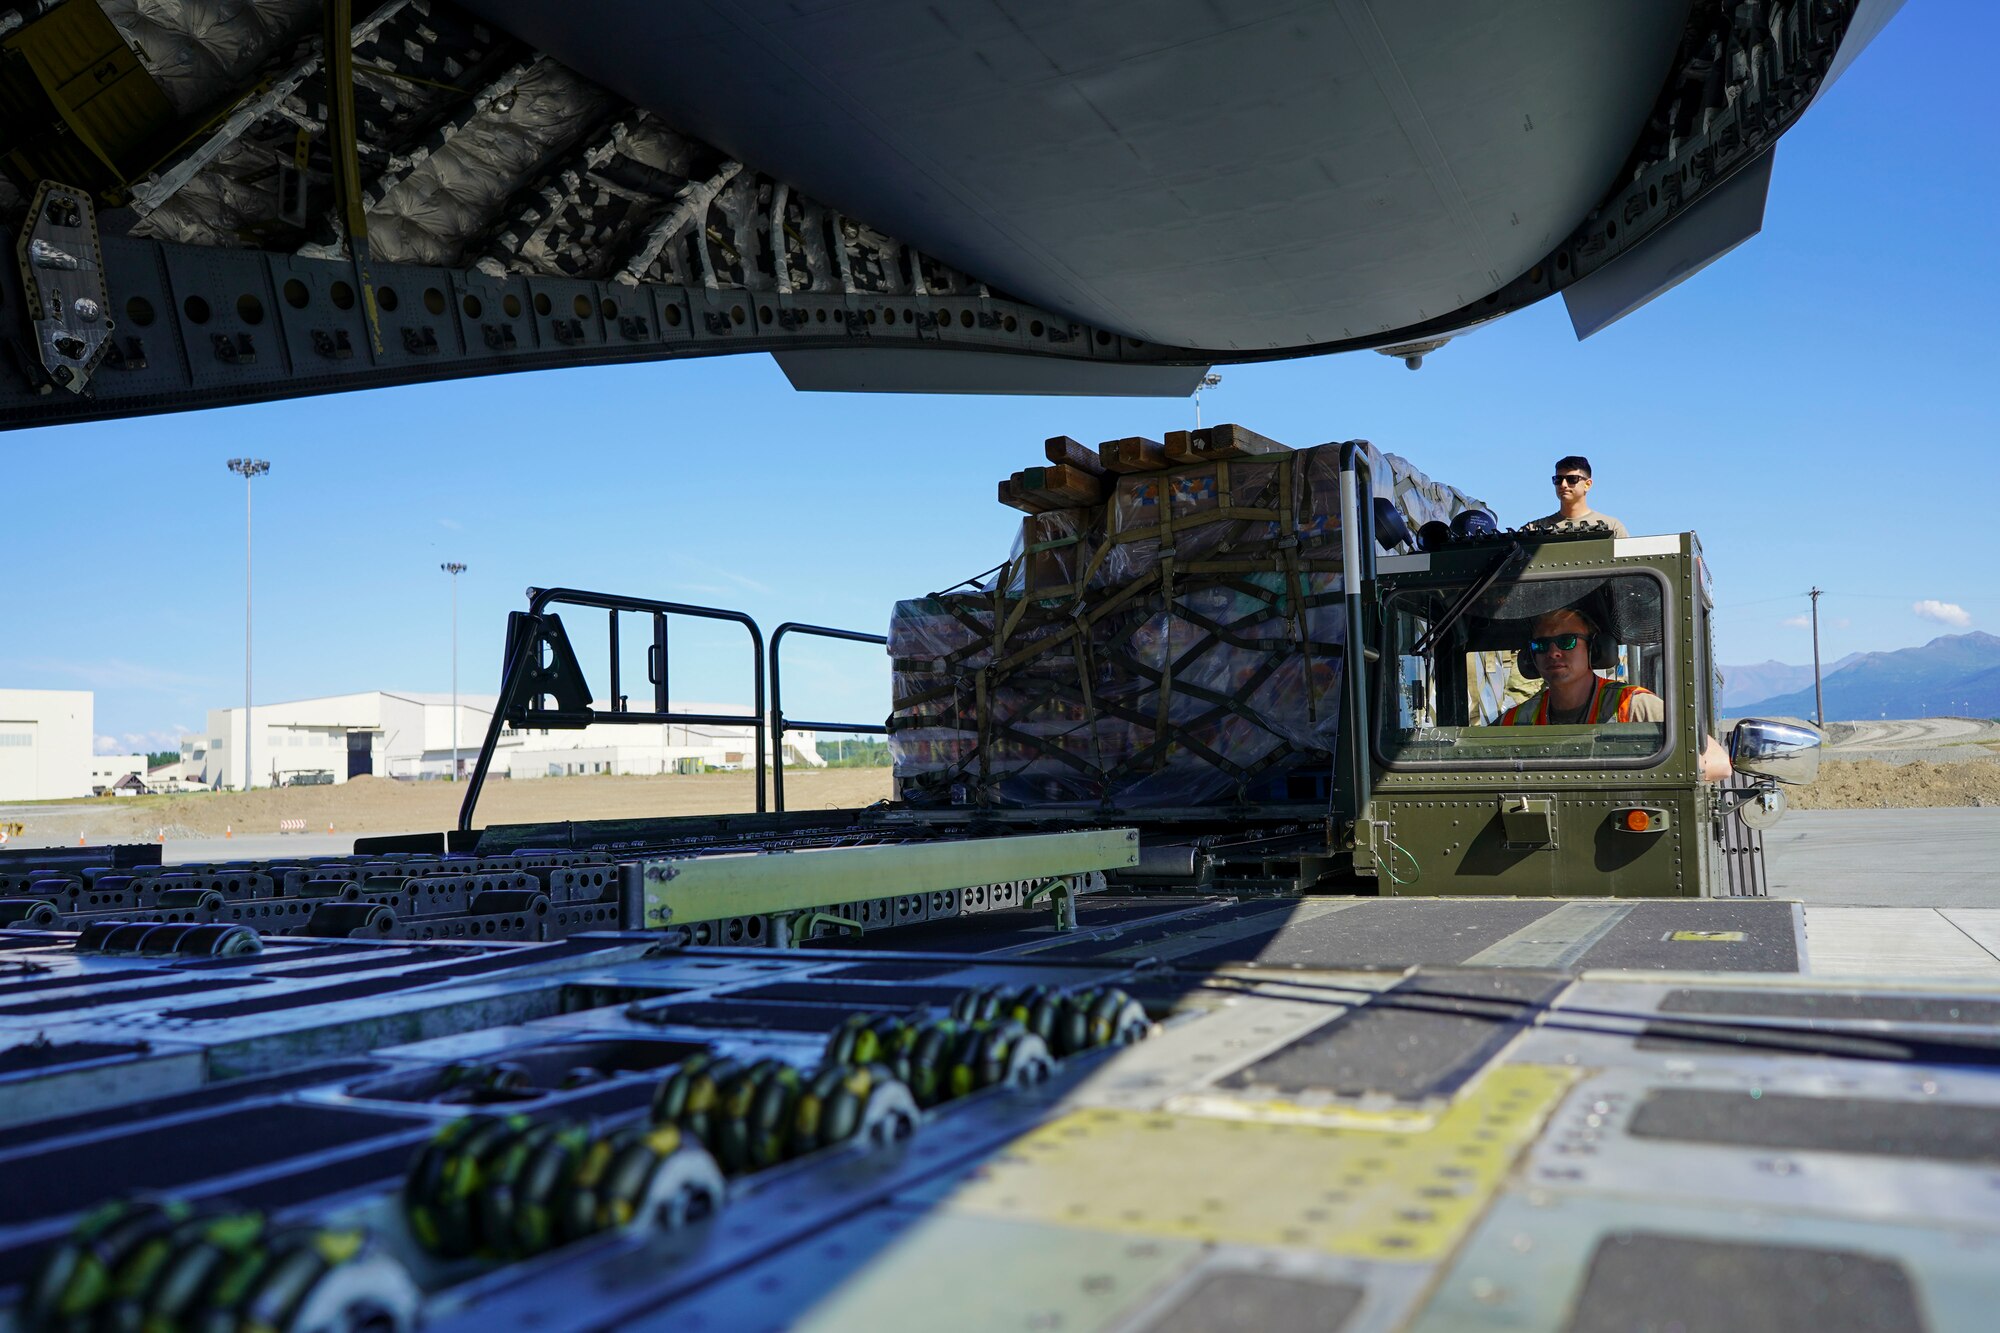 JOINT BASE ELMENDORF-RICHARDSON, Alaska -- The Alaska National Guard transports cargo for the Defense Commissary Agency from Joint Base Elmendorf-Richardson via a C-17 Globemaster III aircraft from the 176th Wing’s 144th Airlift Squadron to the remote village hub of Bethel, Alaska, Aug. 2, 2021. The AKNG partnered with DeCA in order to provide discounted groceries to eligible military- and DoD-affiliated patrons during a one-day event Aug. 7. (U.S. Army National Guard photos by 1st Lt. Balinda O’Neal Dresel)